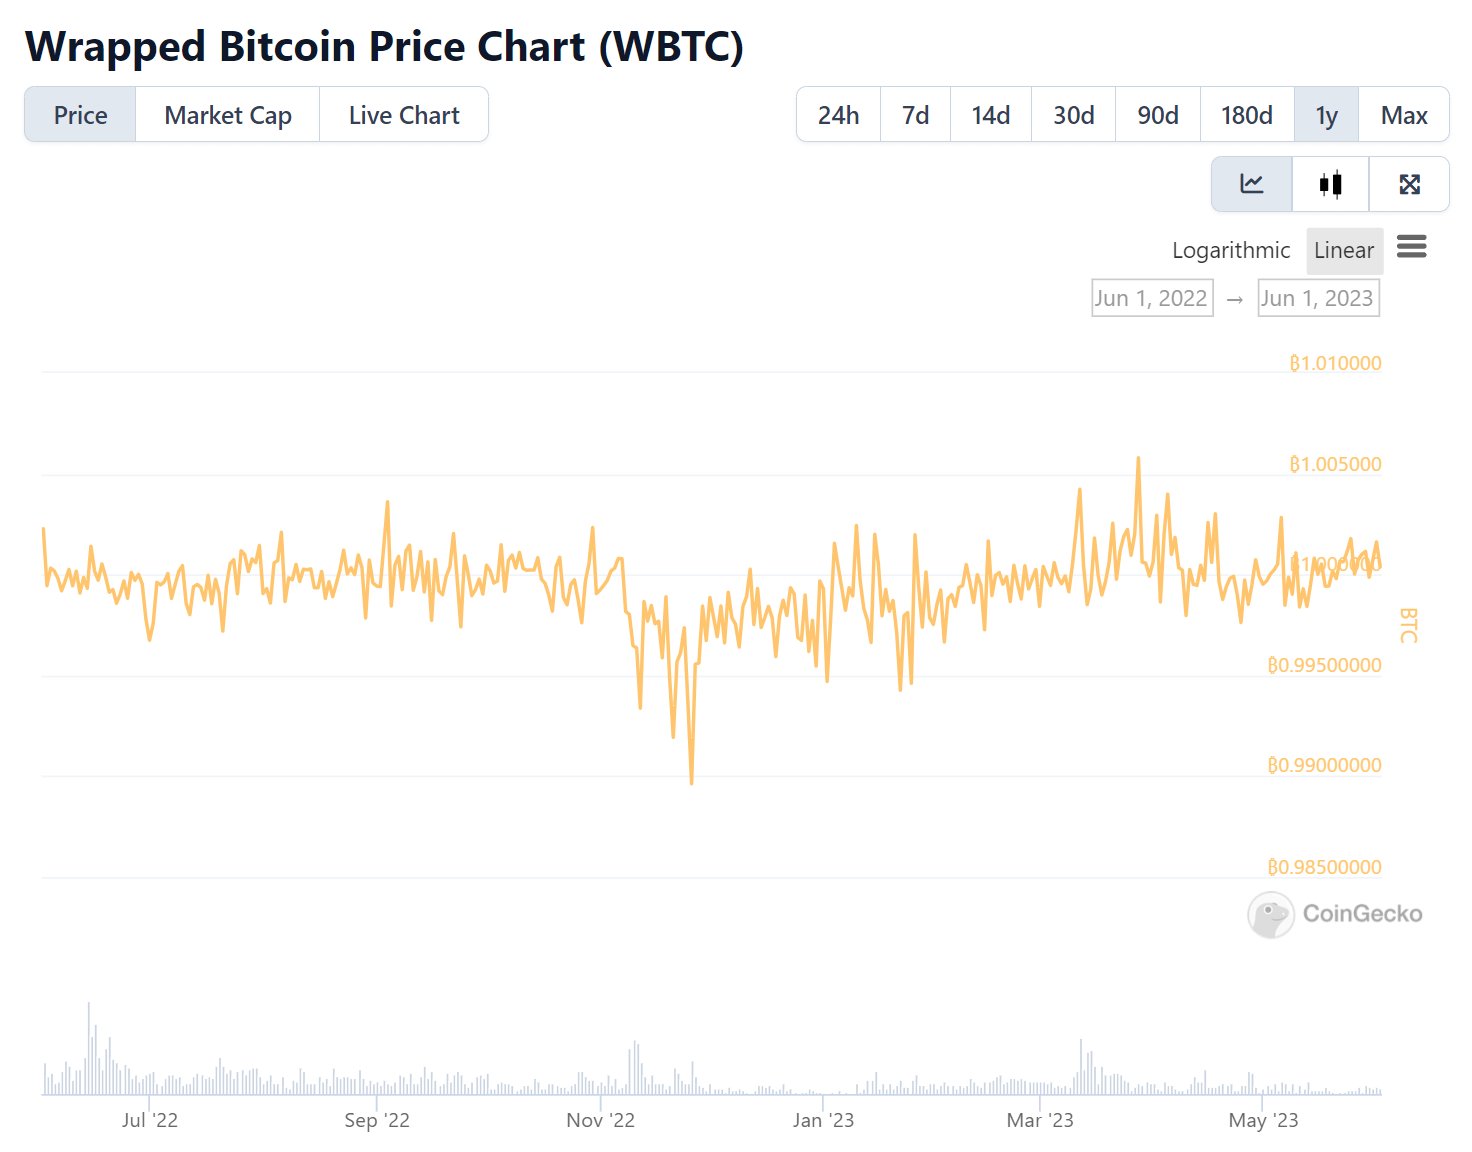 Wrapped bitcoin (WBTC) price chart from CoinGecko showing FTX collapse